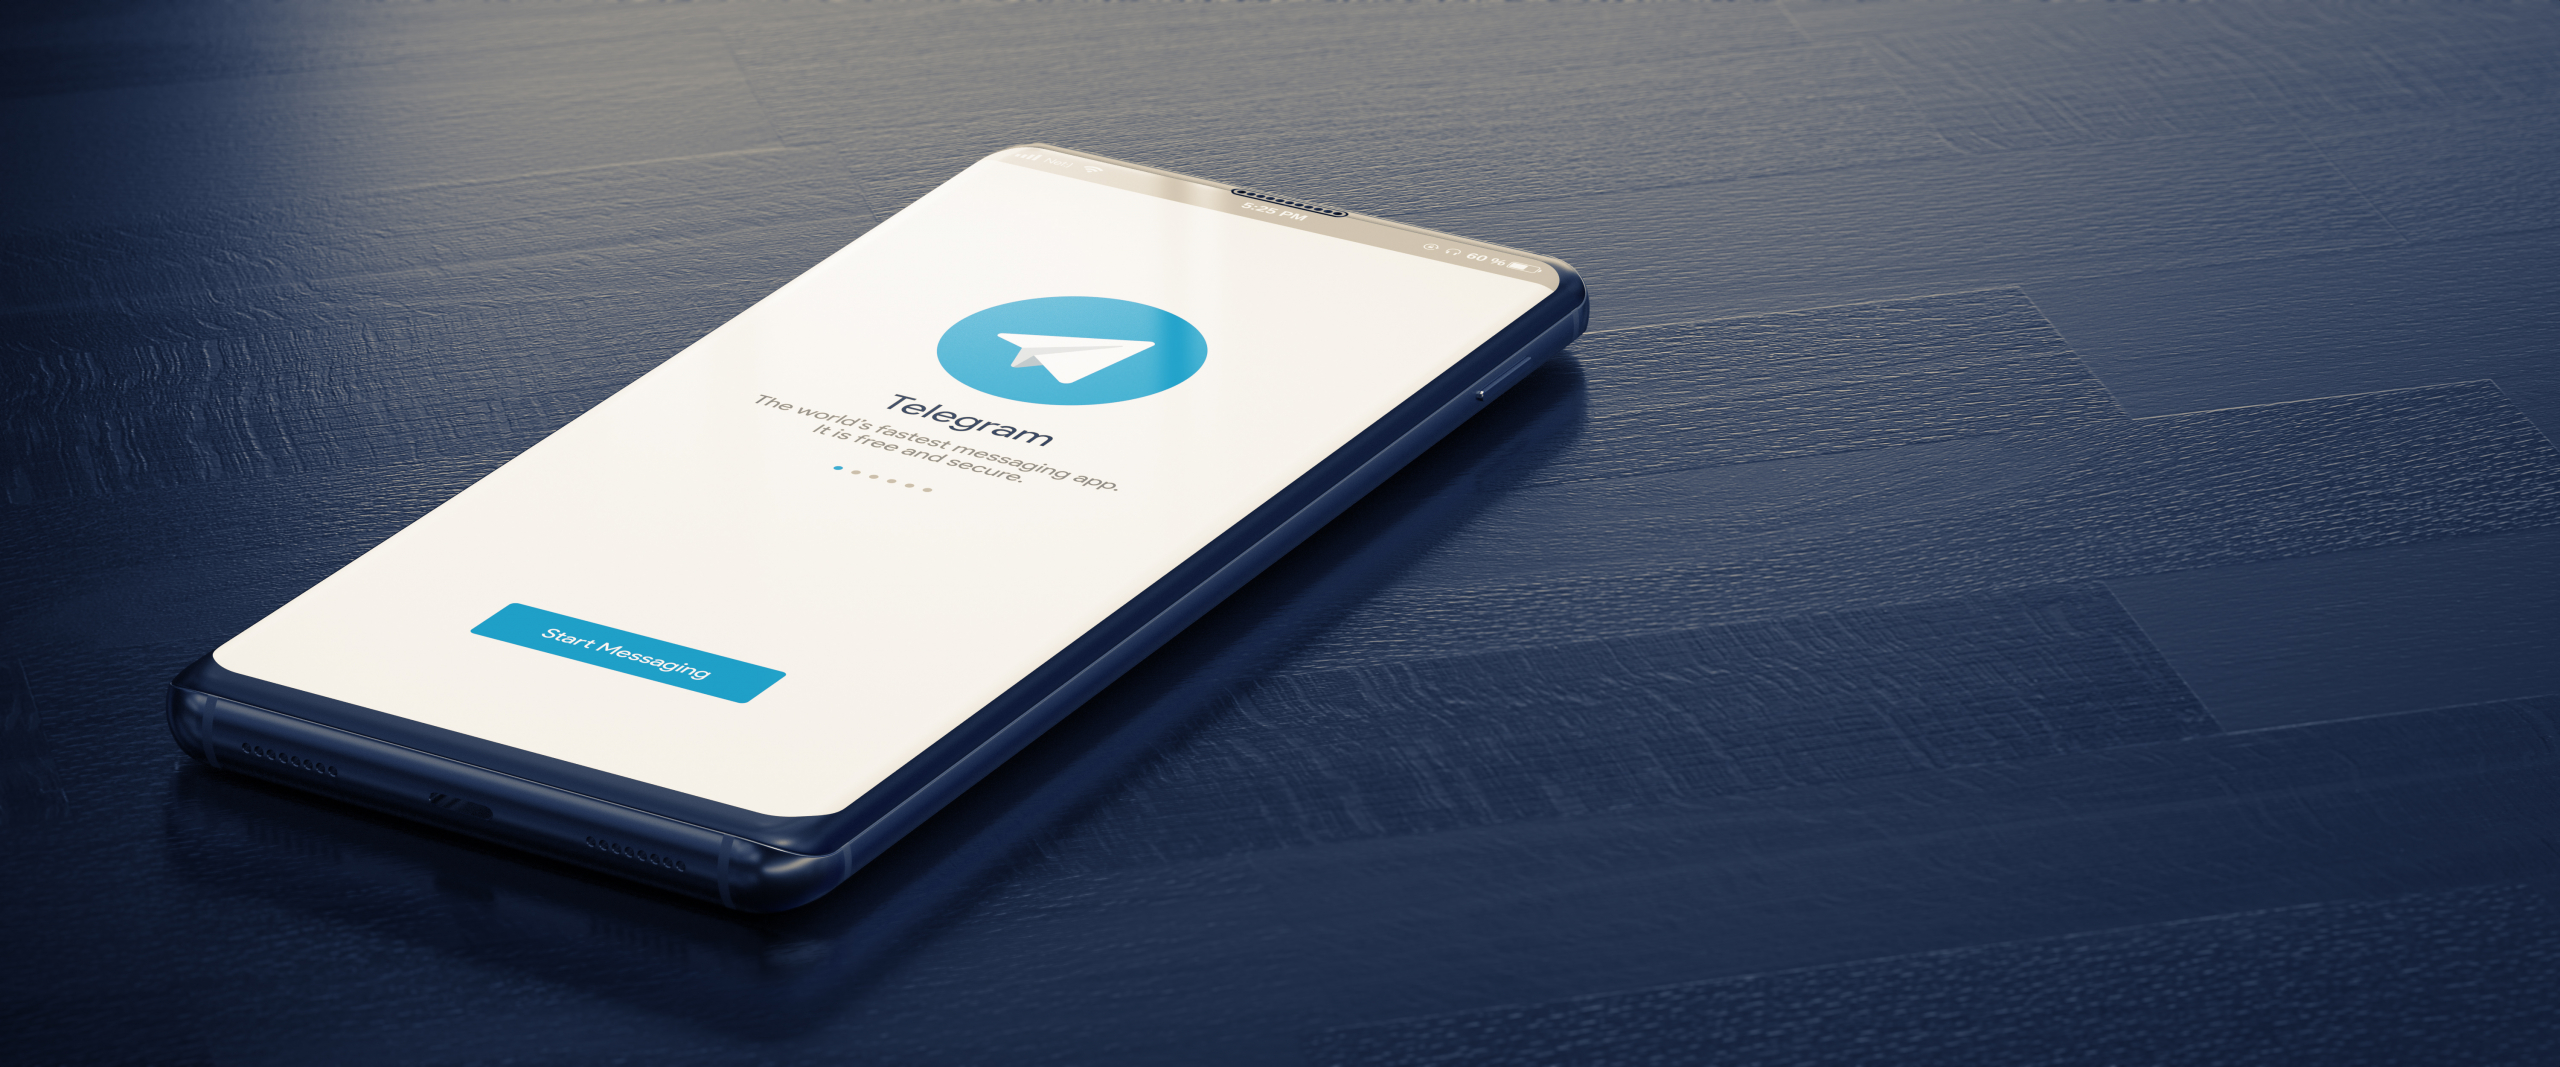 Telegram users can now send crypto through the app
